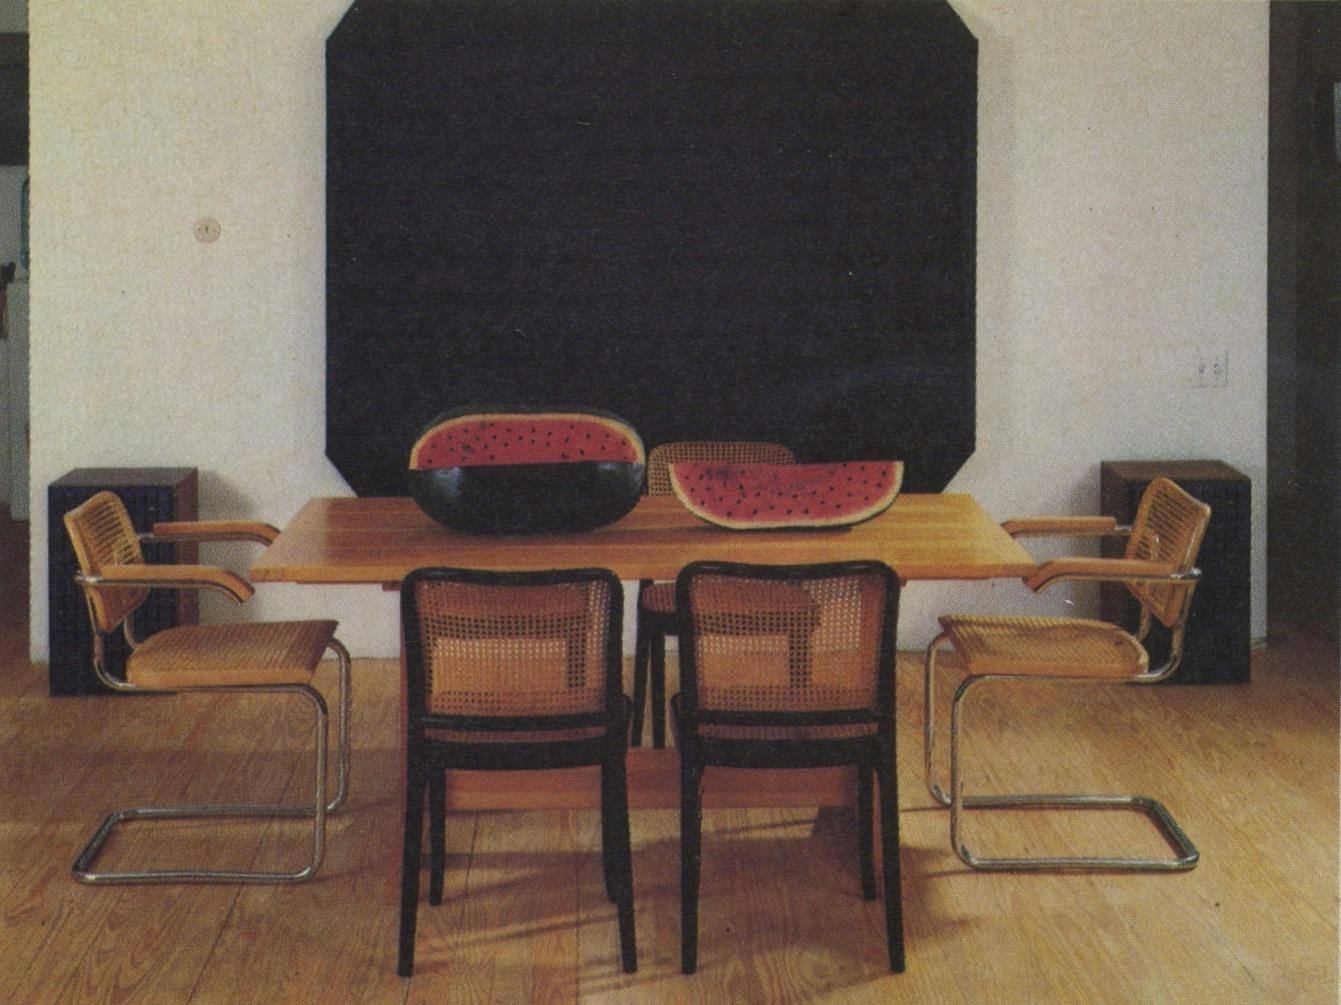 Ralph Humphrey’s heavily textured black oil provides a dramatic background for the colorful watermelon centerpiece carved from cottonwood and painted by Felipe Archuleta. Around the table are original Cesca (light) and Thonet (black) chairs.